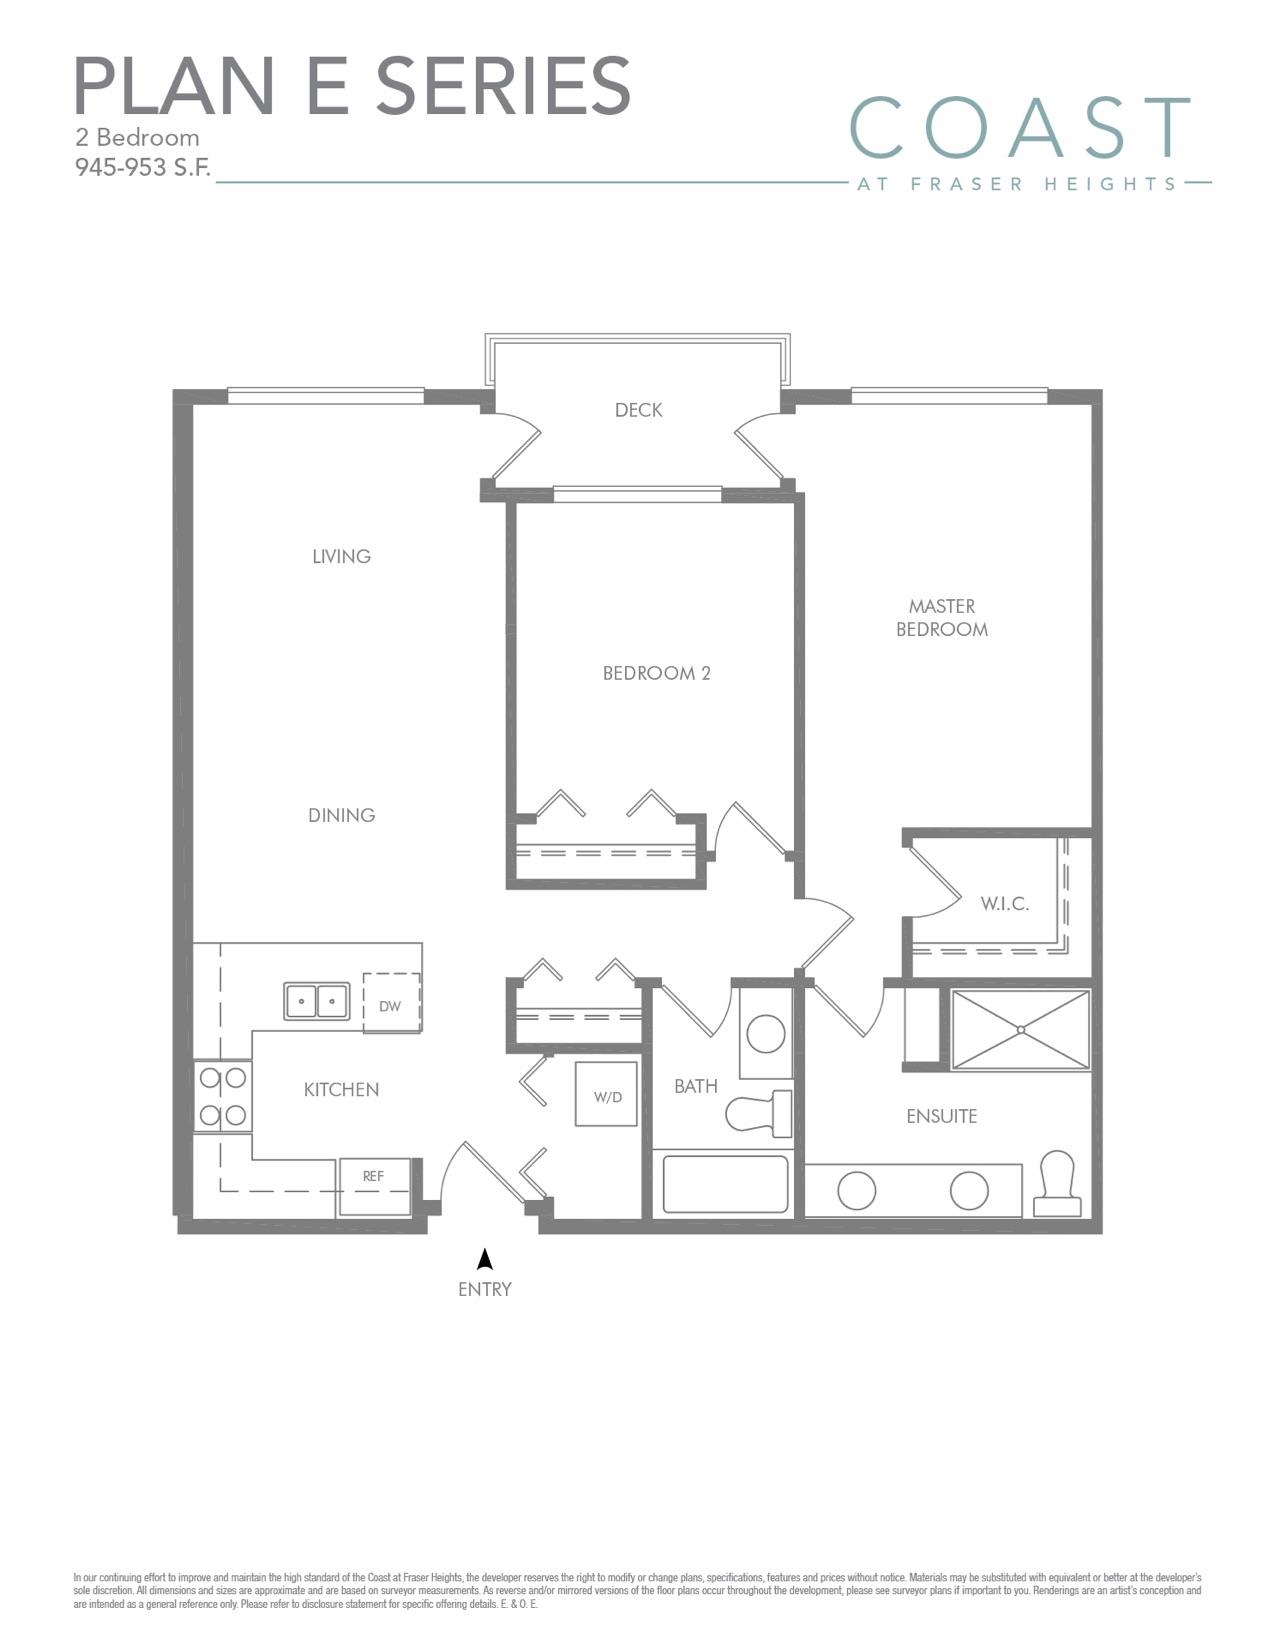 216 Floor Plan of COAST at Fraser Heights Condos with undefined beds